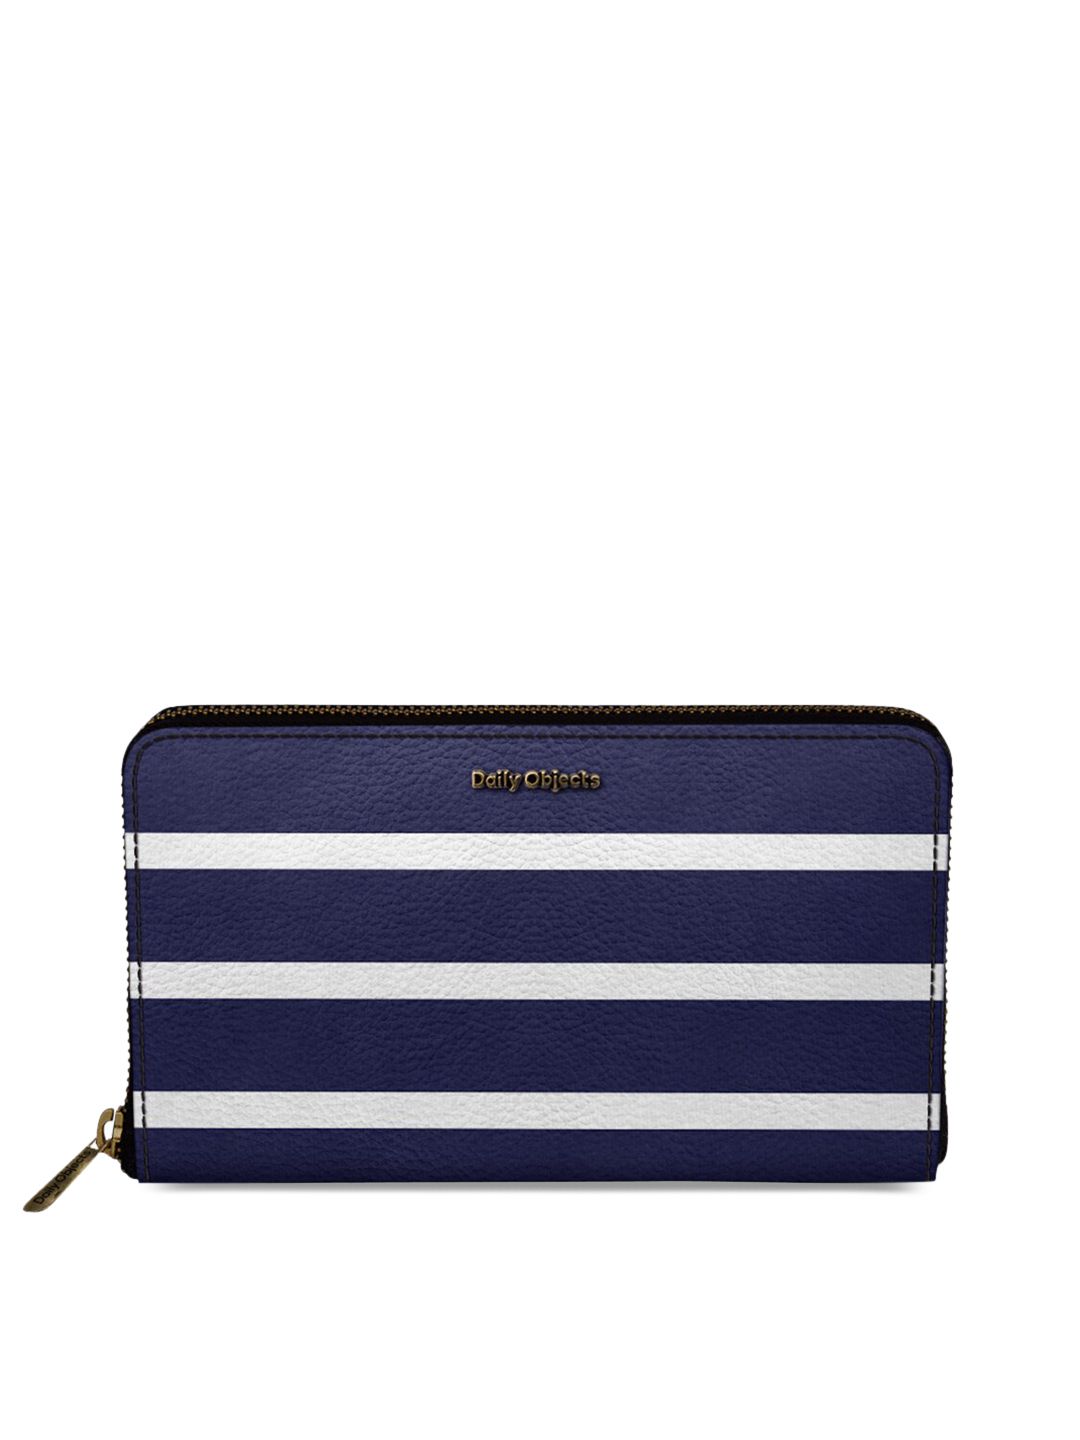 DailyObjects Women Blue & White Striped Zip Around Wallet Price in India